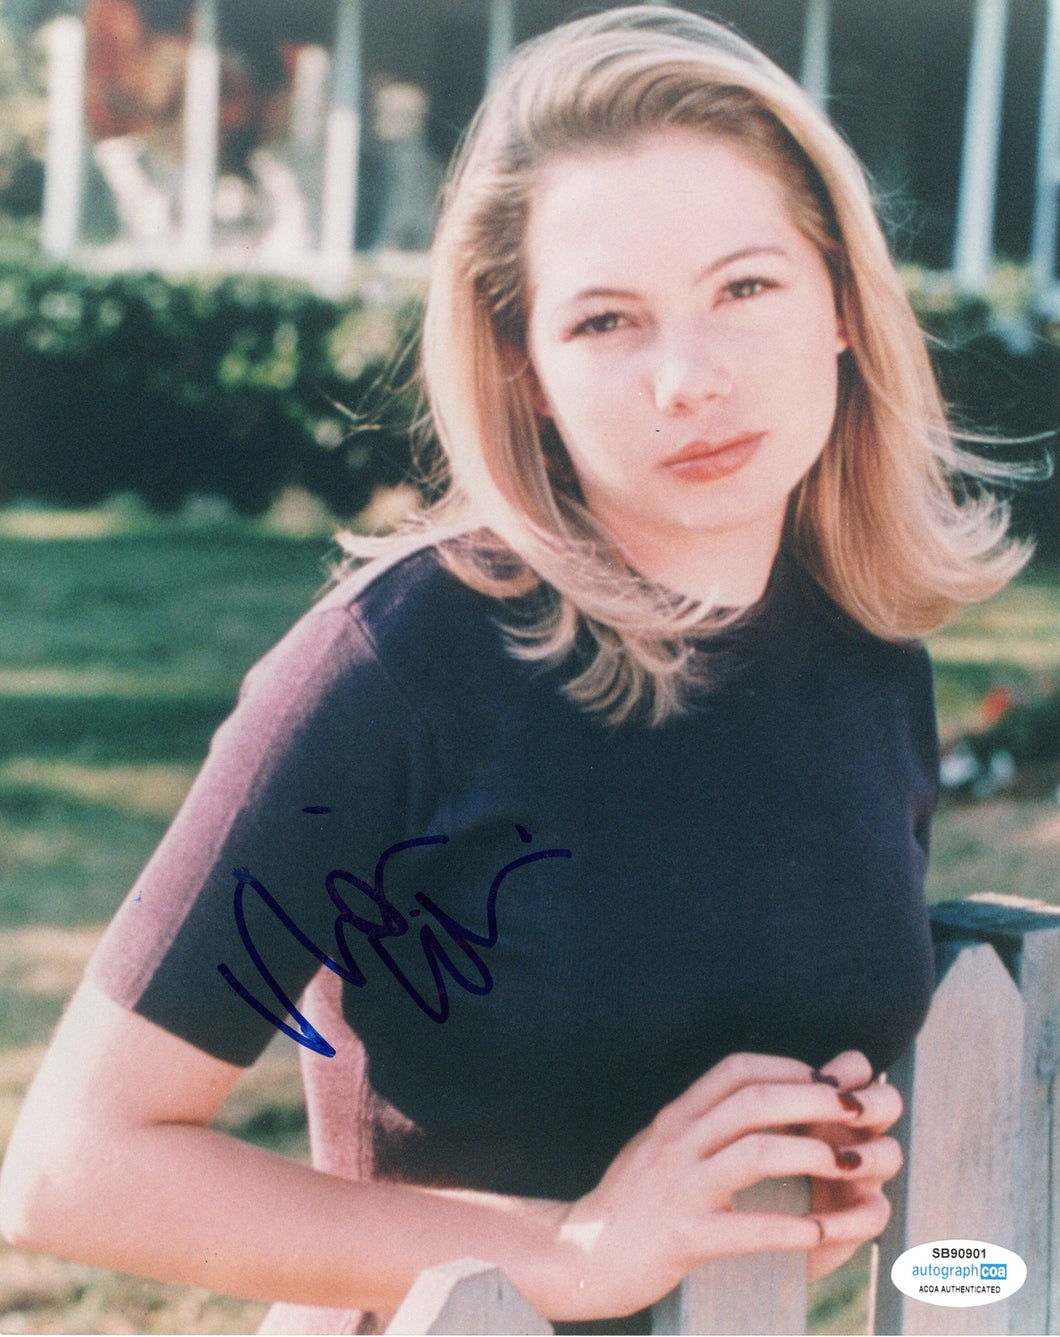 Michelle Williams Autographed Signed 8x10 Young Pretty Photo